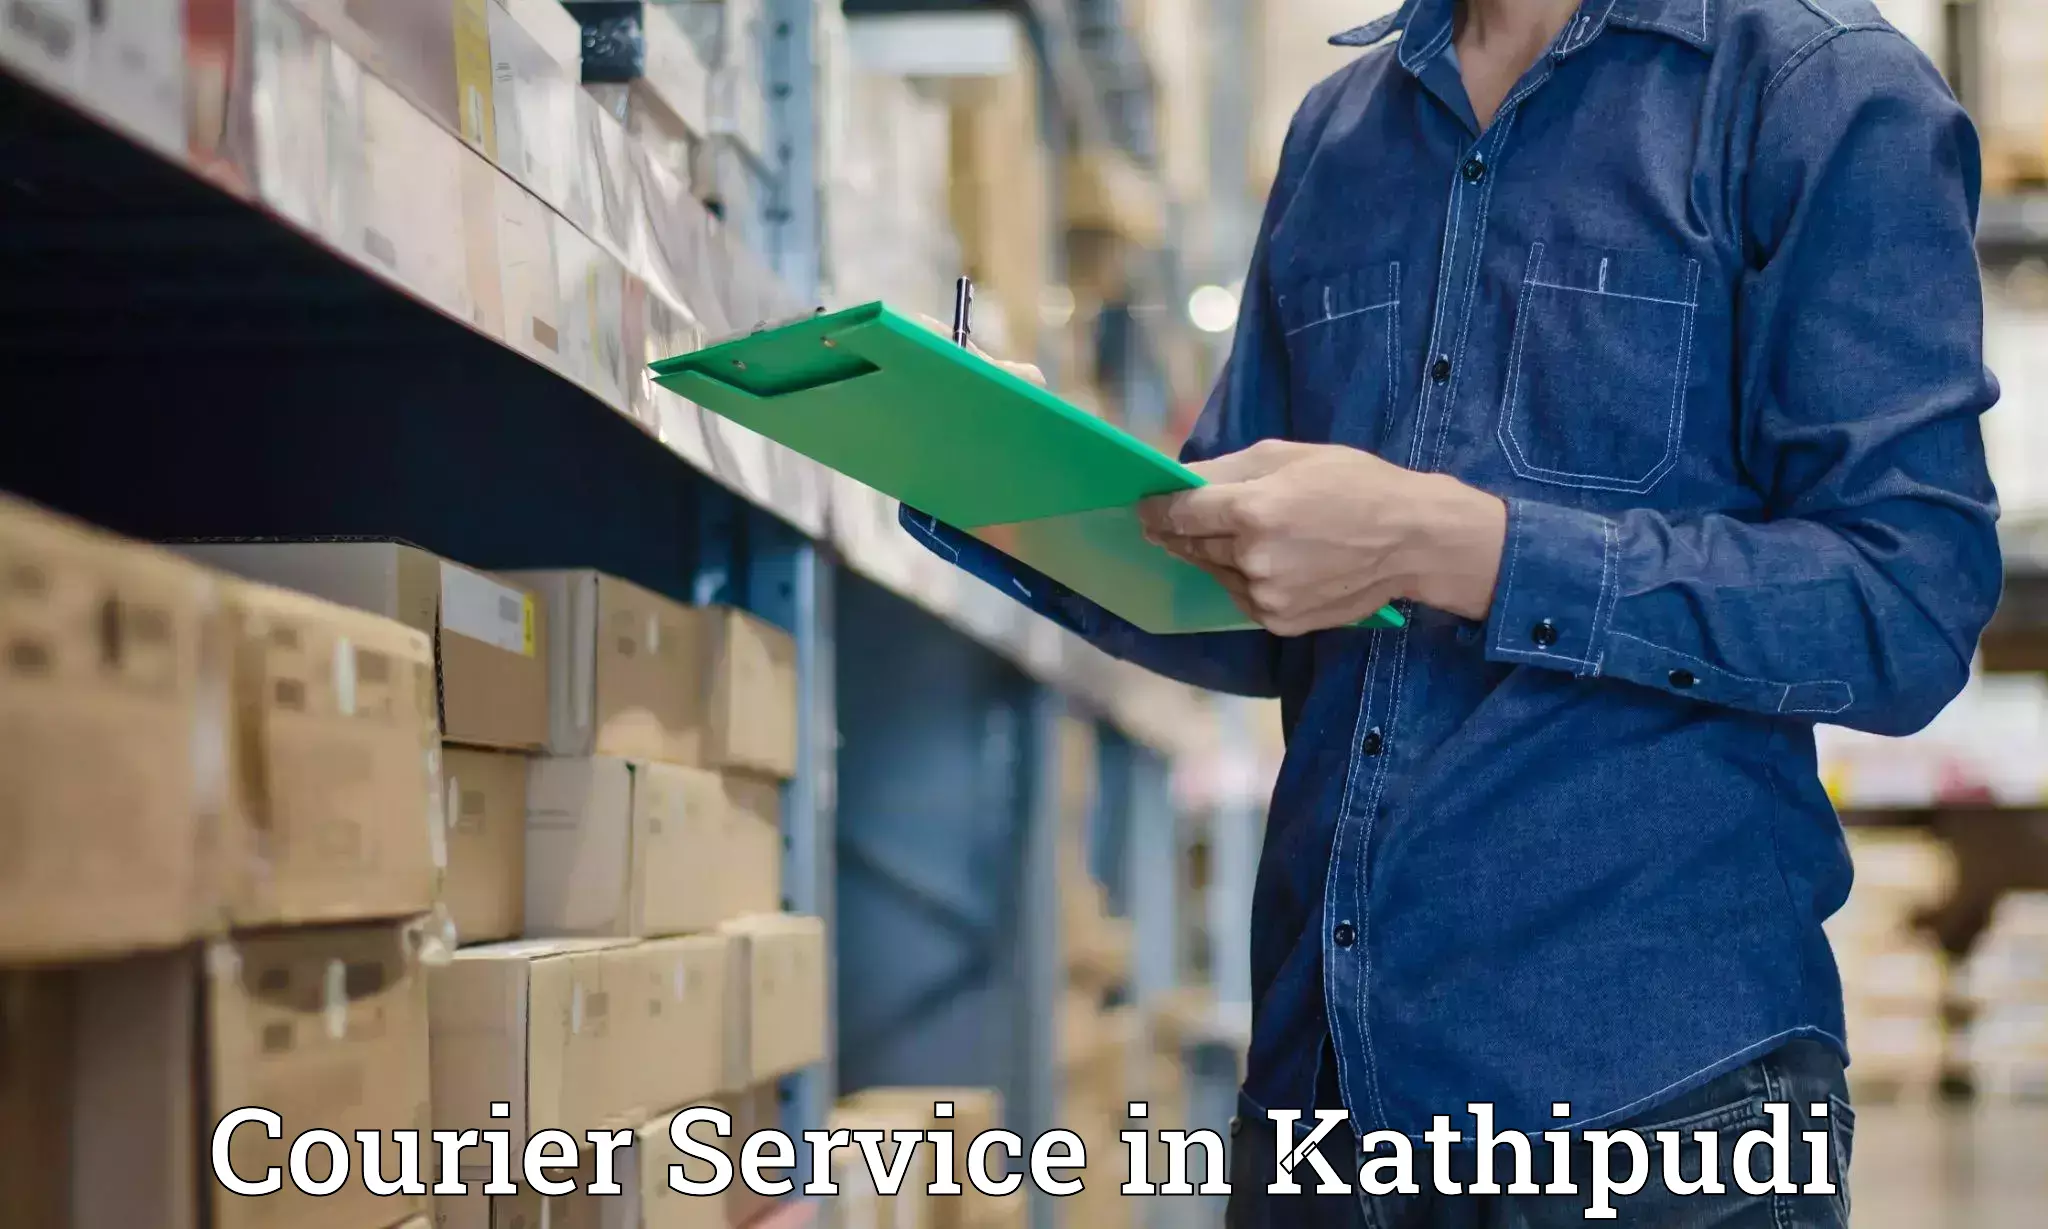 Postal and courier services in Kathipudi